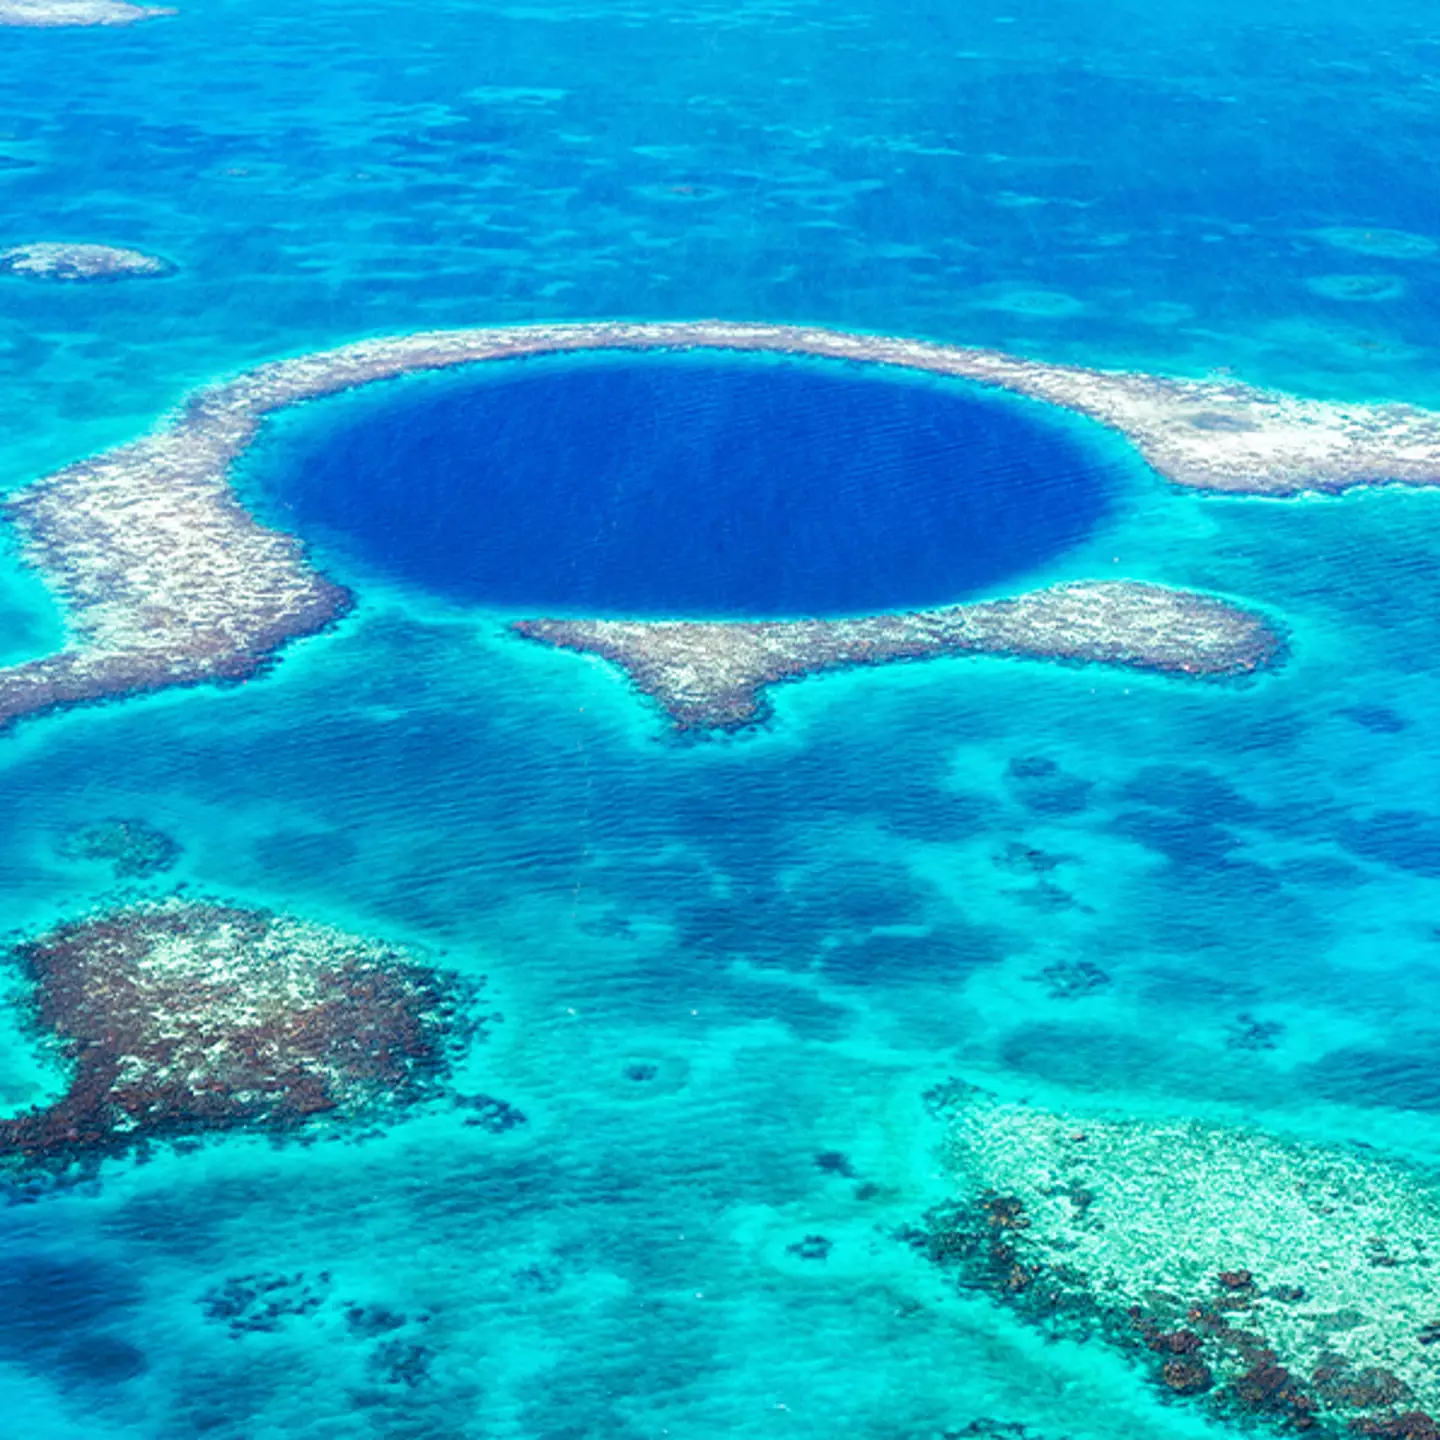 Divers make shocking discovery at the bottom of the mysterious Great Blue Hole